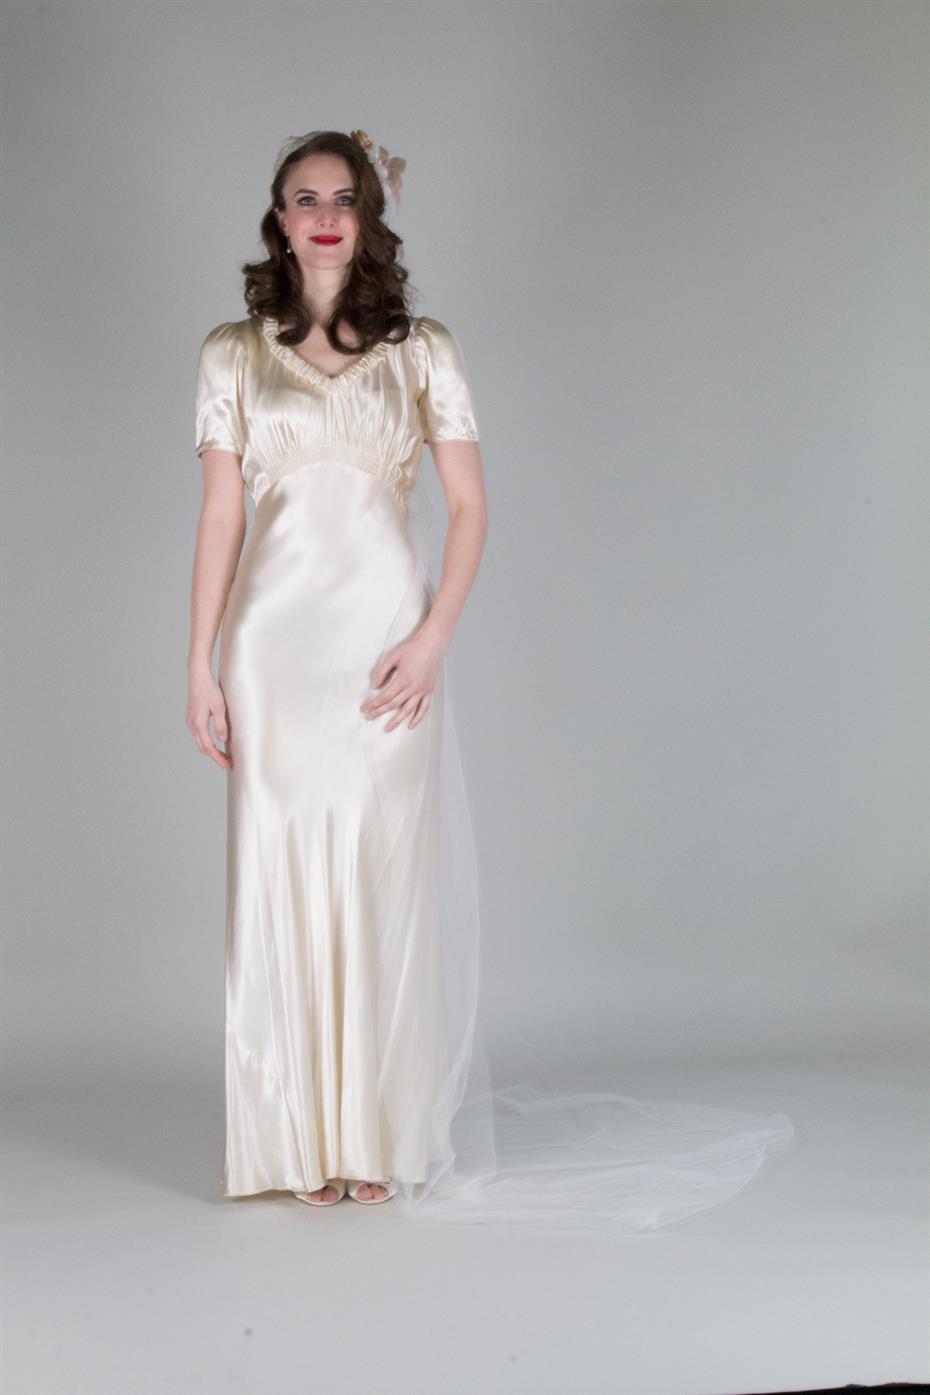 Dreamy Vintage Wedding Dresses from Authentic Vintage Bridal ...